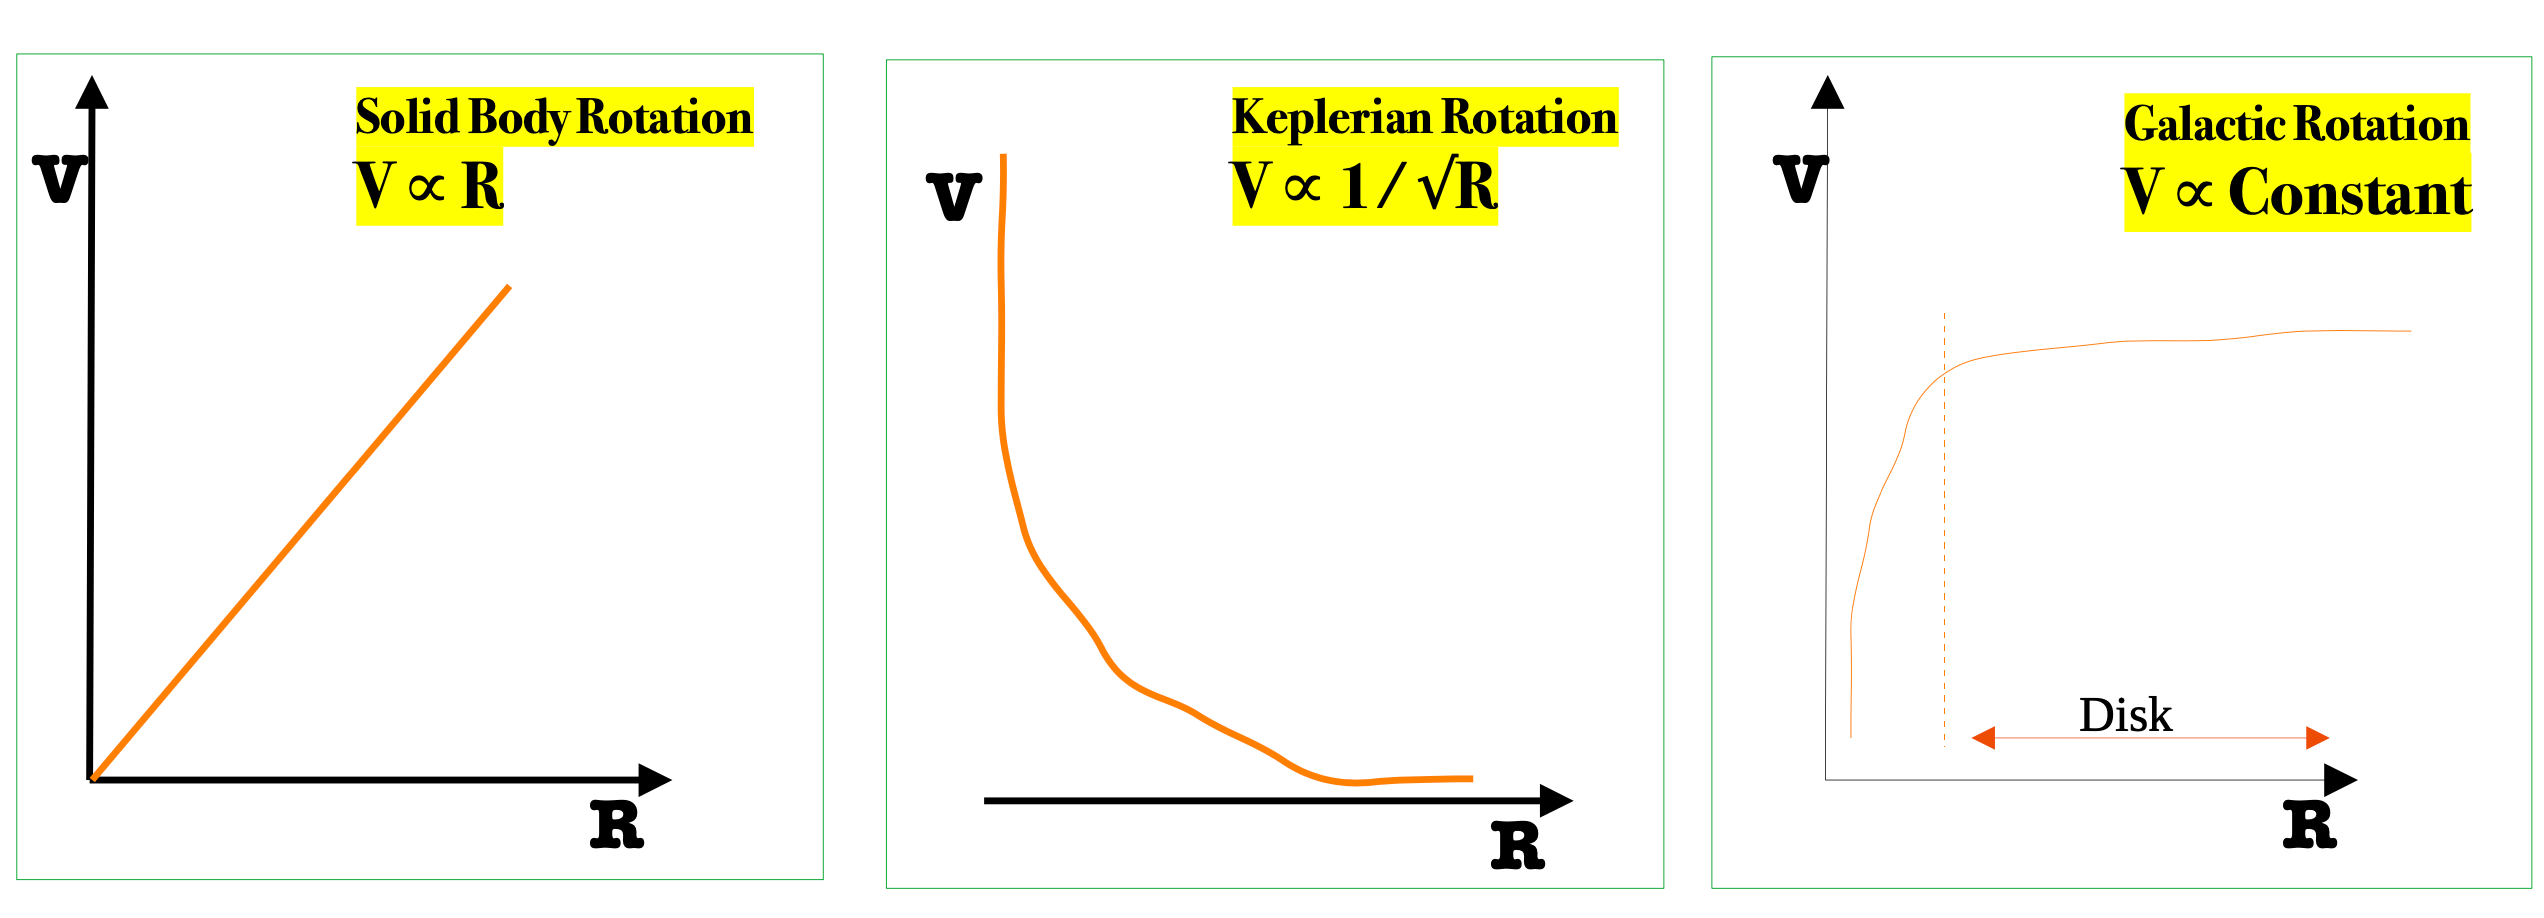 Typical graph models for solid, Keplerian, and galactic rotation. 